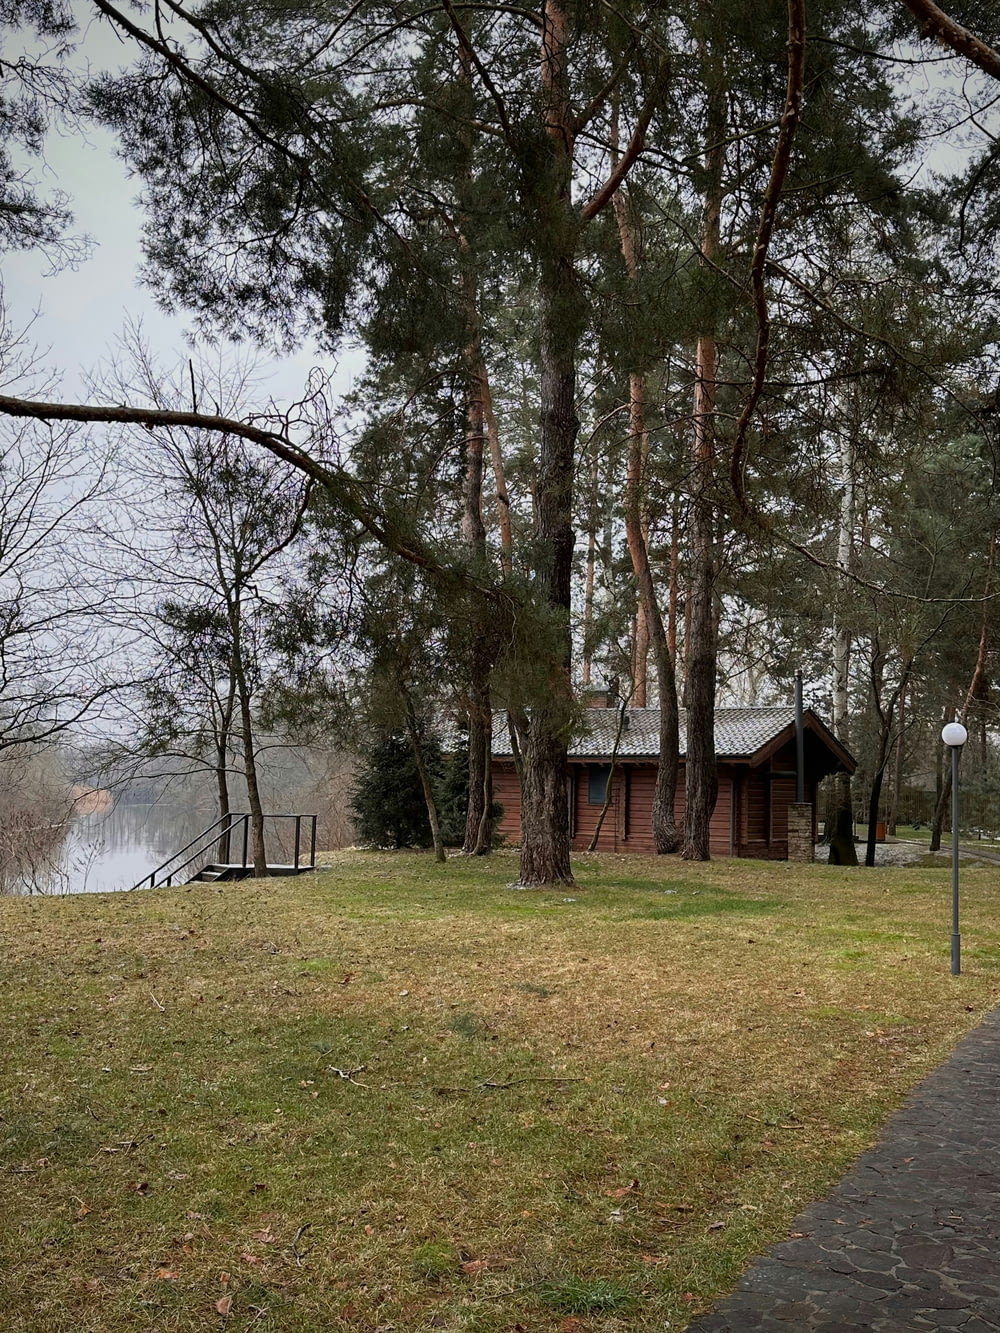 a house sitting next to a lake surrounded by trees